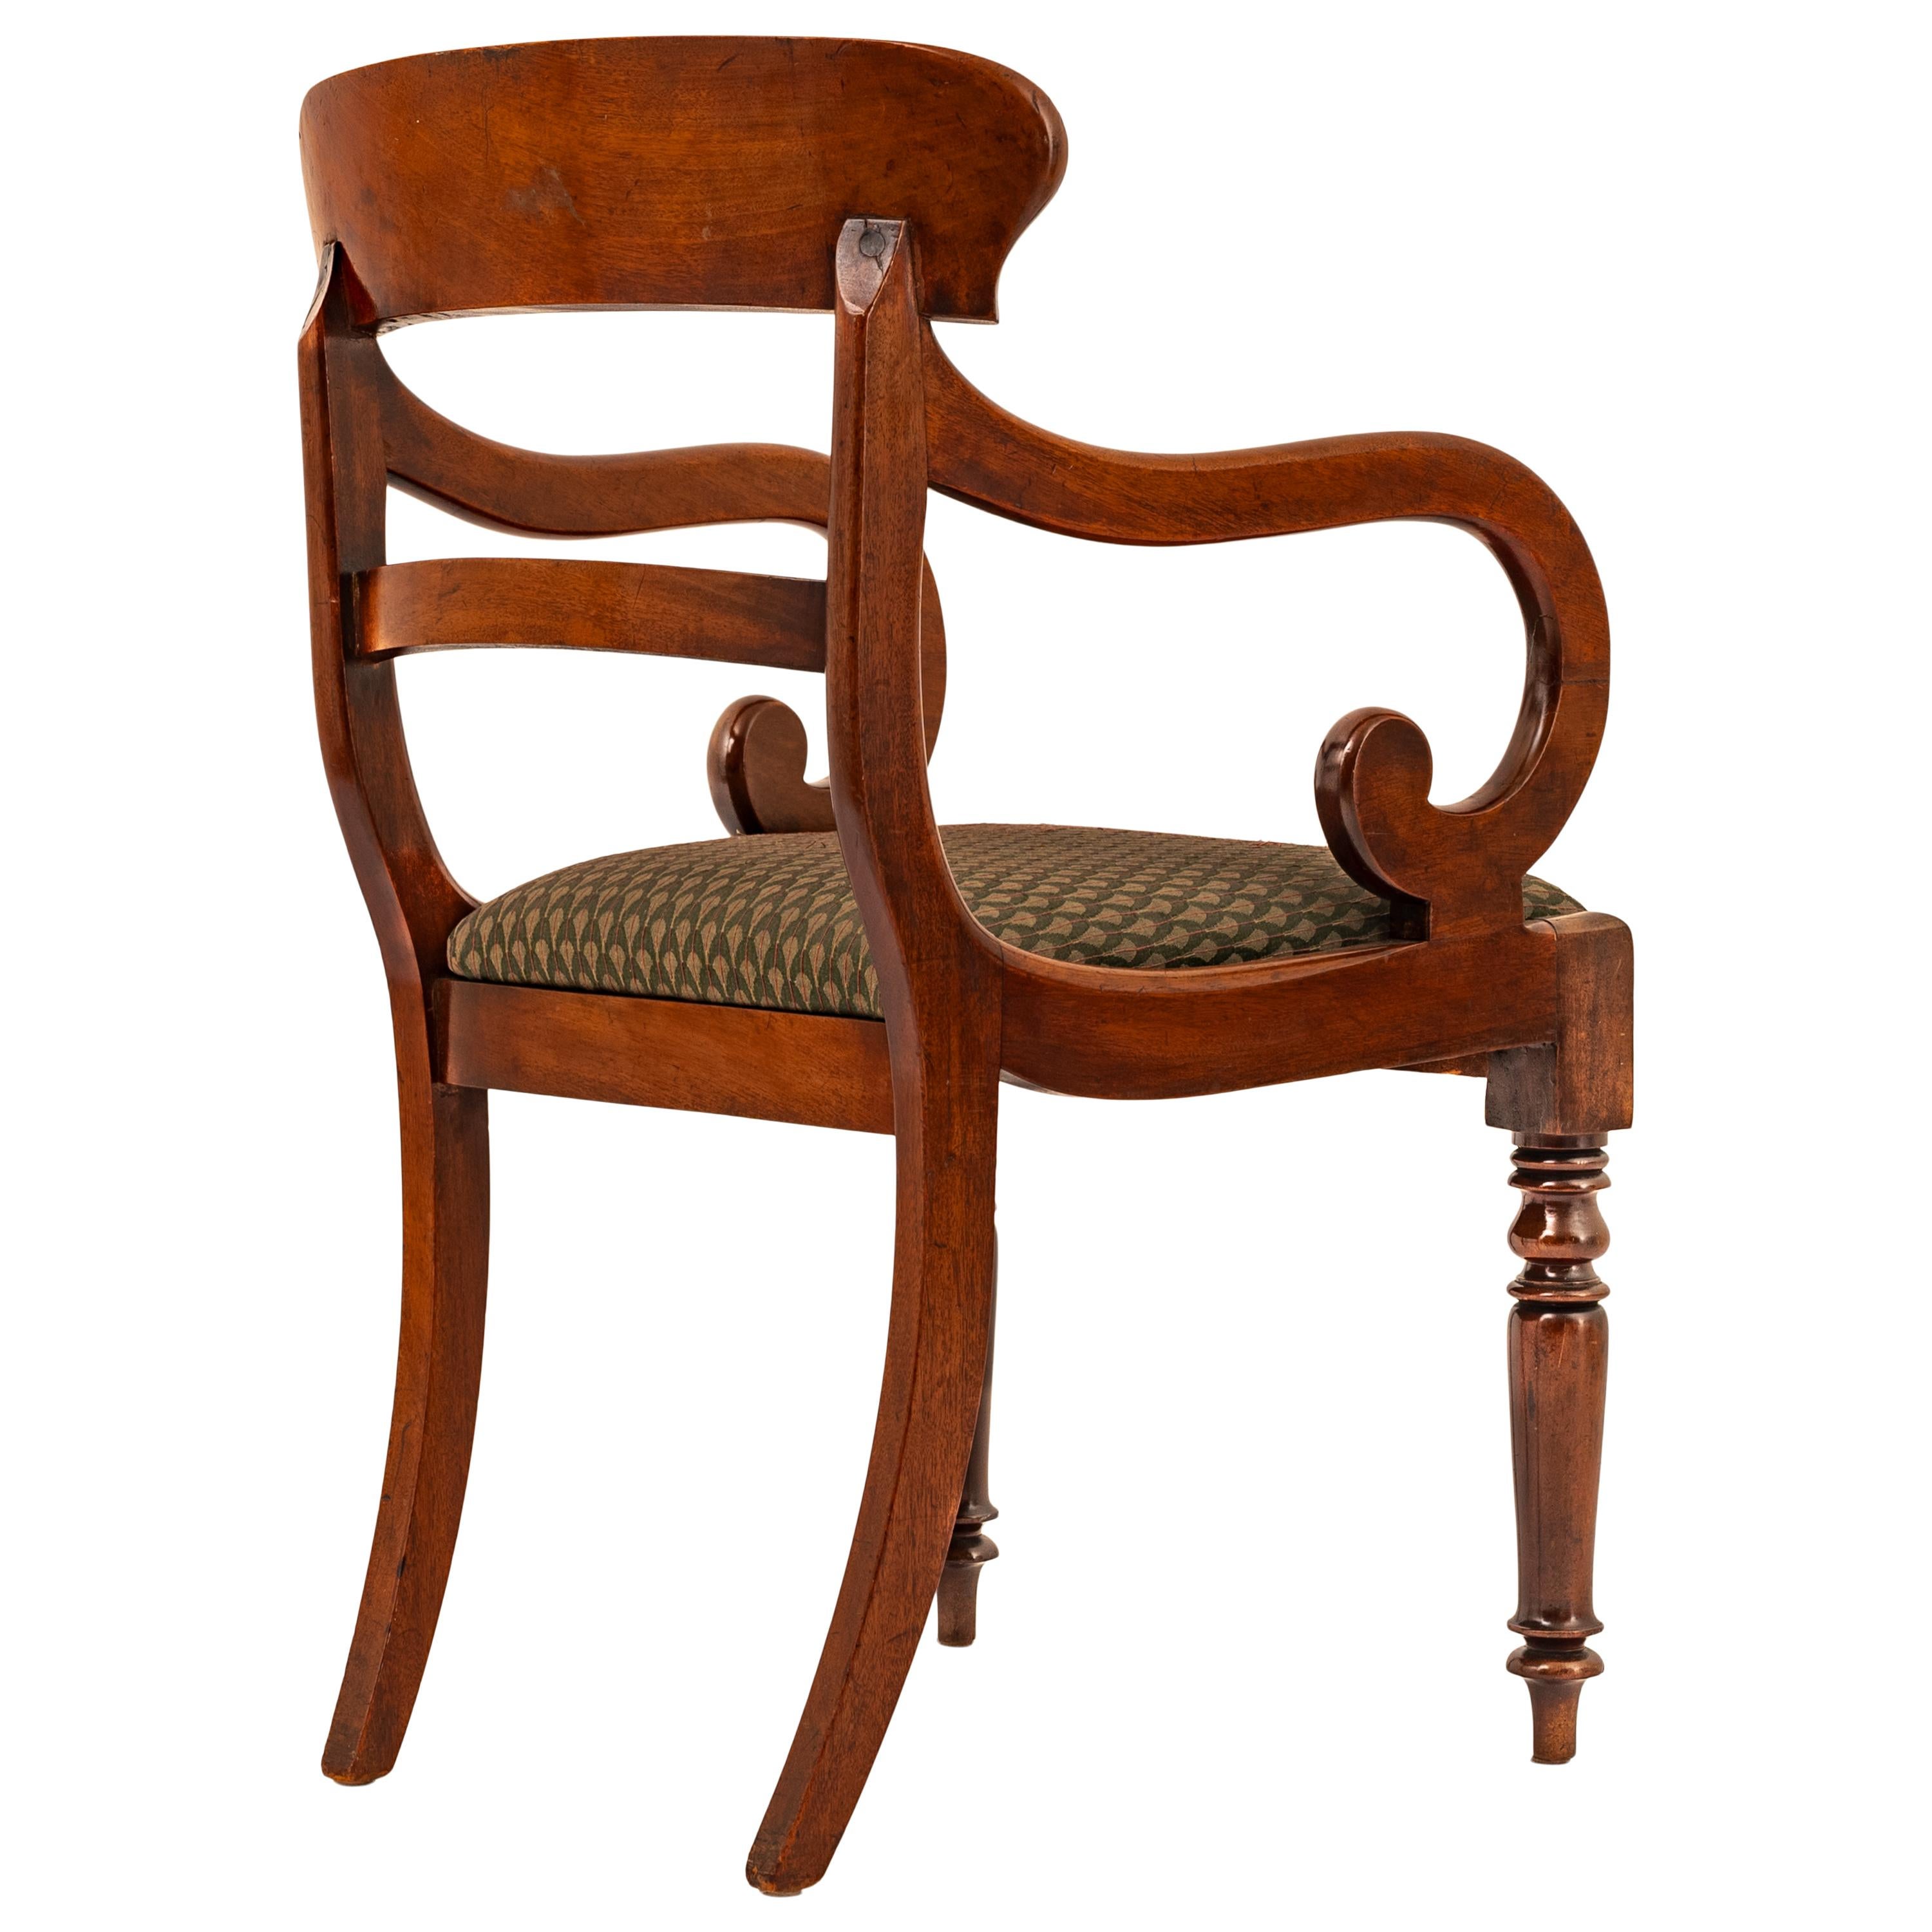 Early 19th Century Antique 19th Century Georgian Regency Mahogany Armchair Library Desk Chair 1820 For Sale